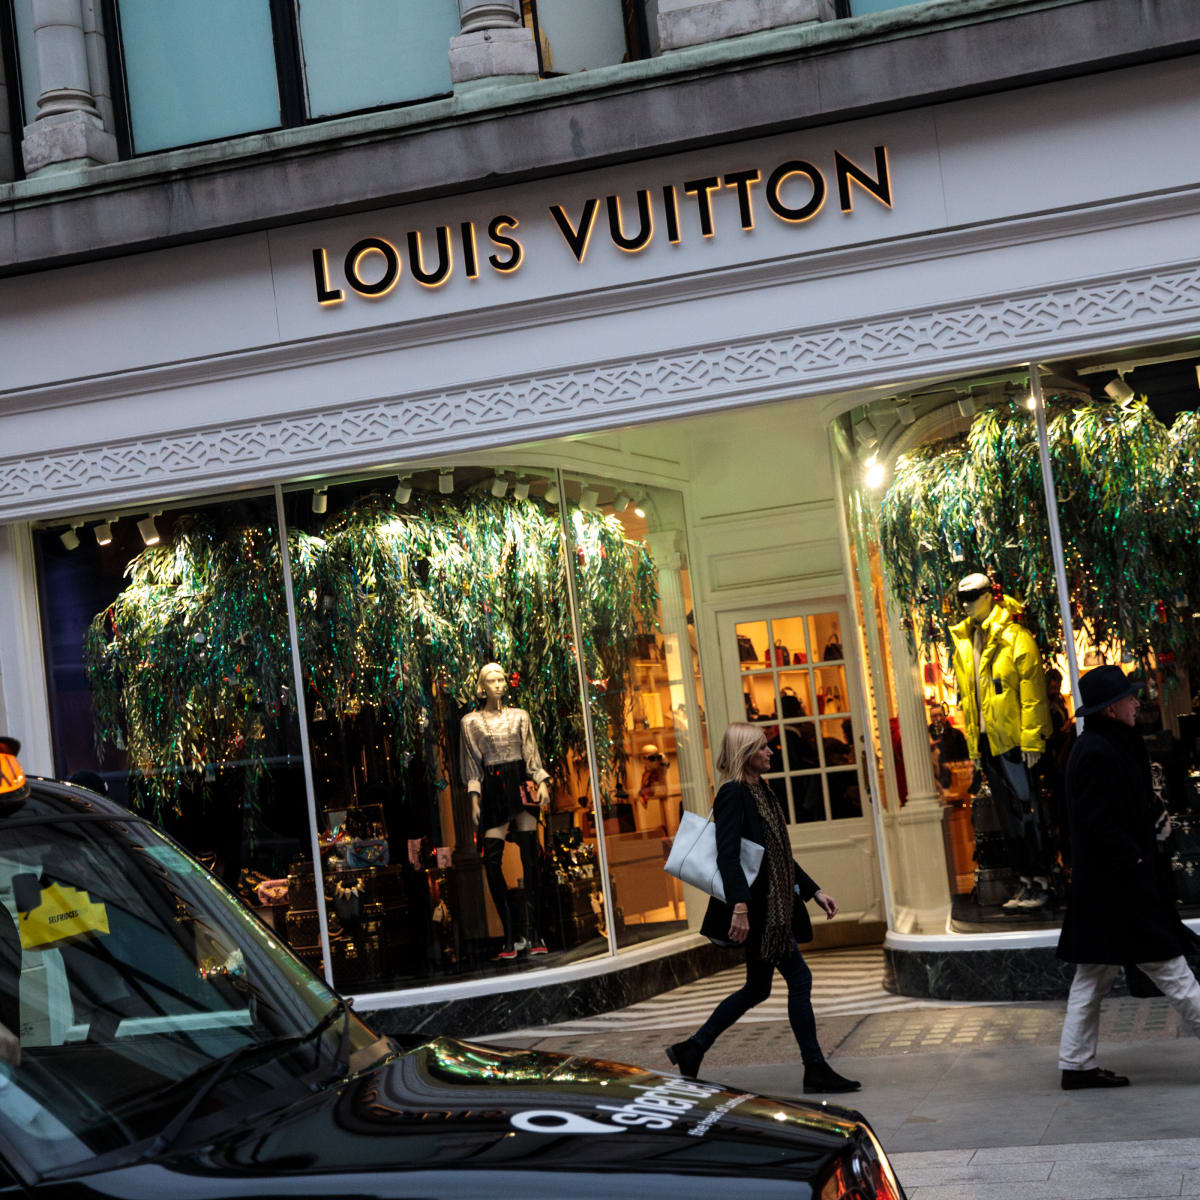 Louis Vuitton New Orleans store, United States